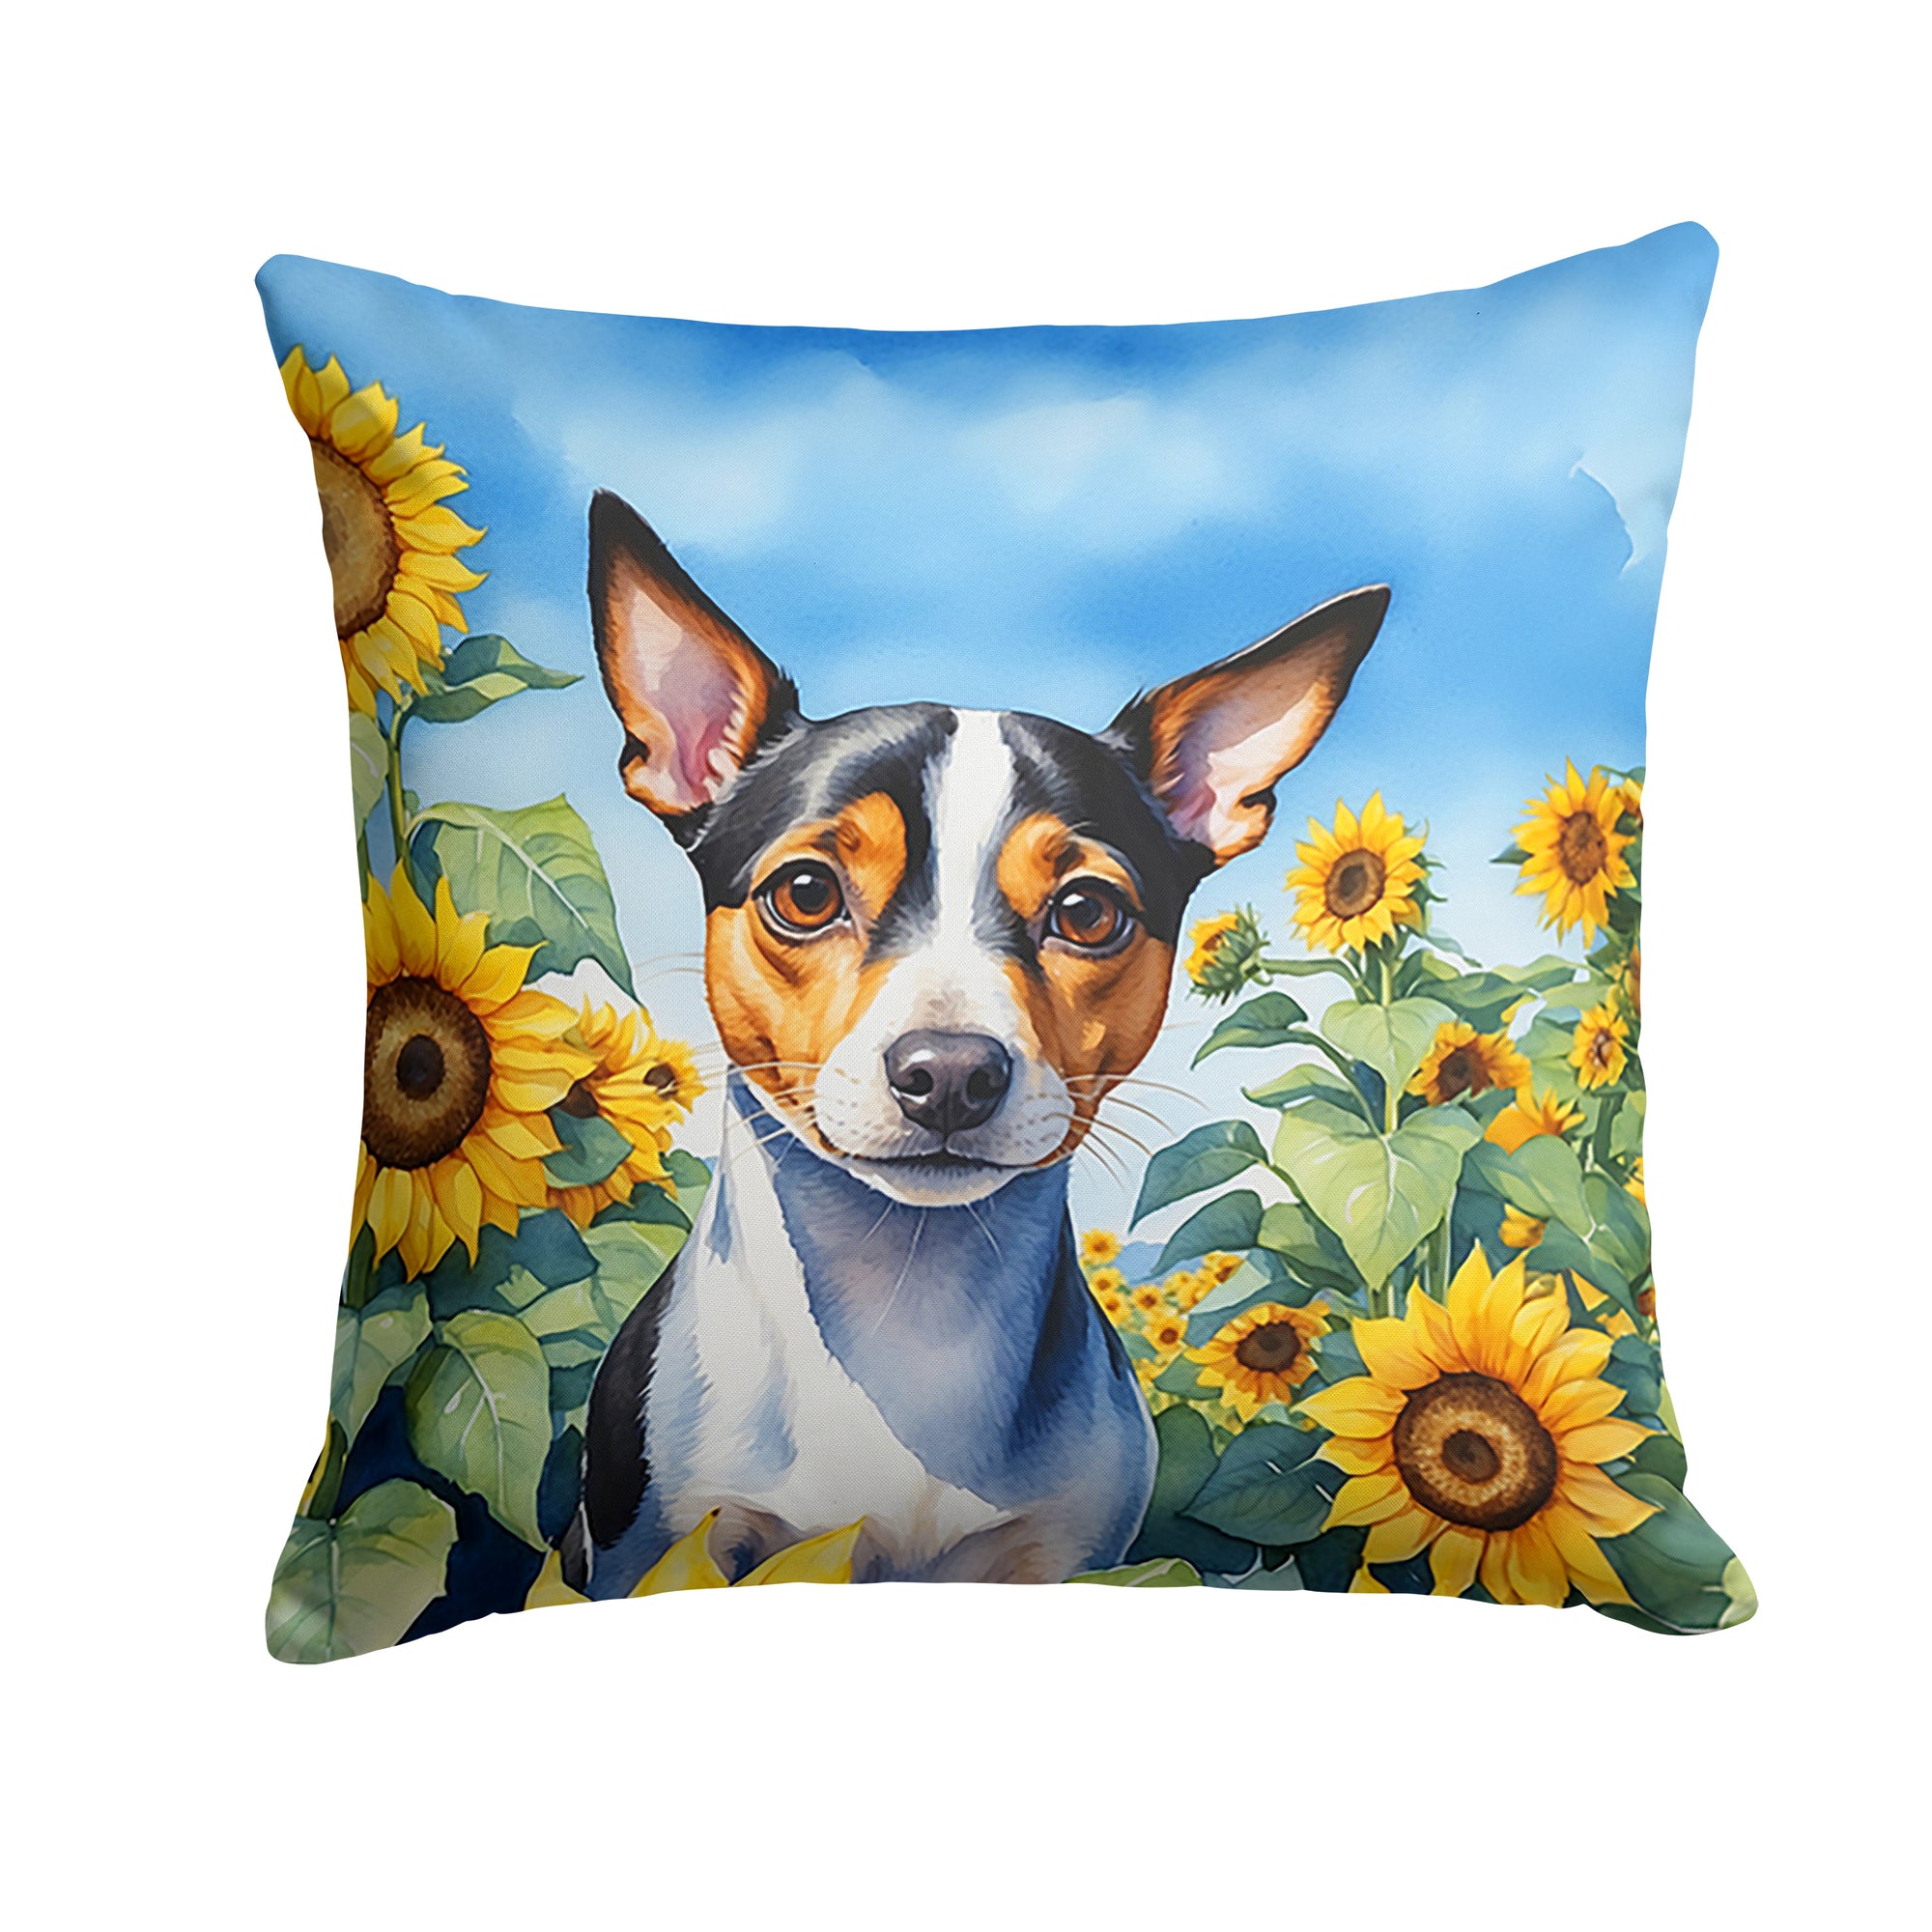 Buy this Rat Terrier in Sunflowers Throw Pillow